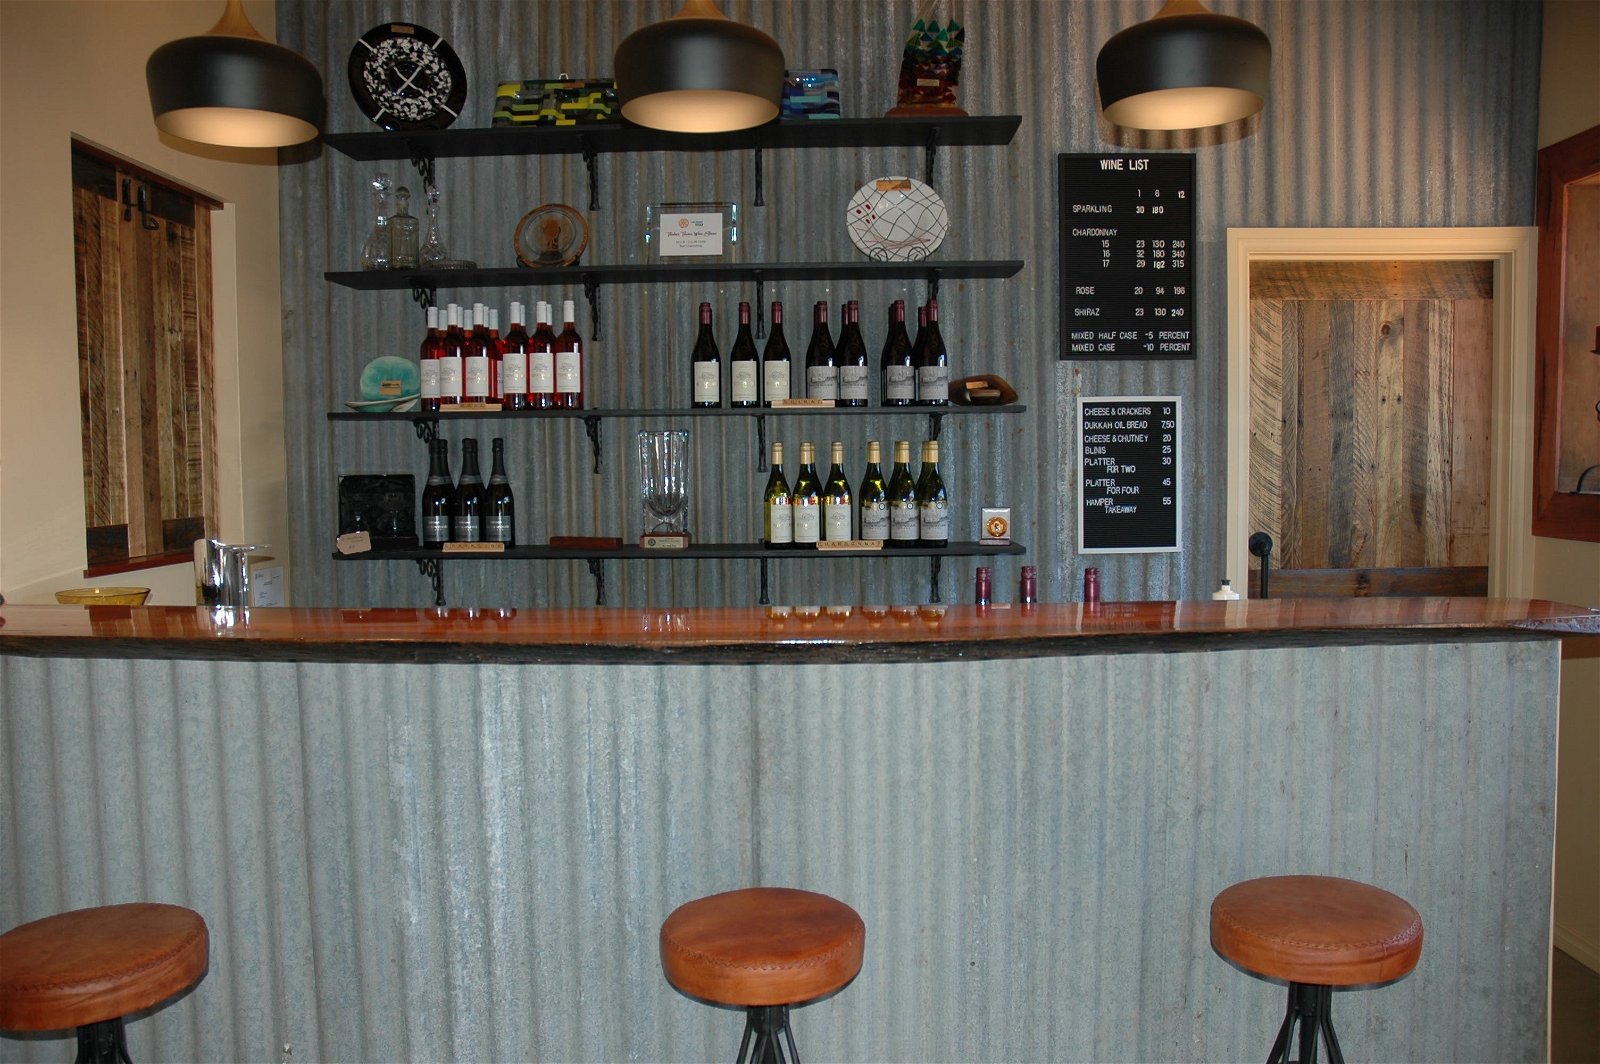 Whimwood Estate Wines Cellar Door - New South Wales Tourism 